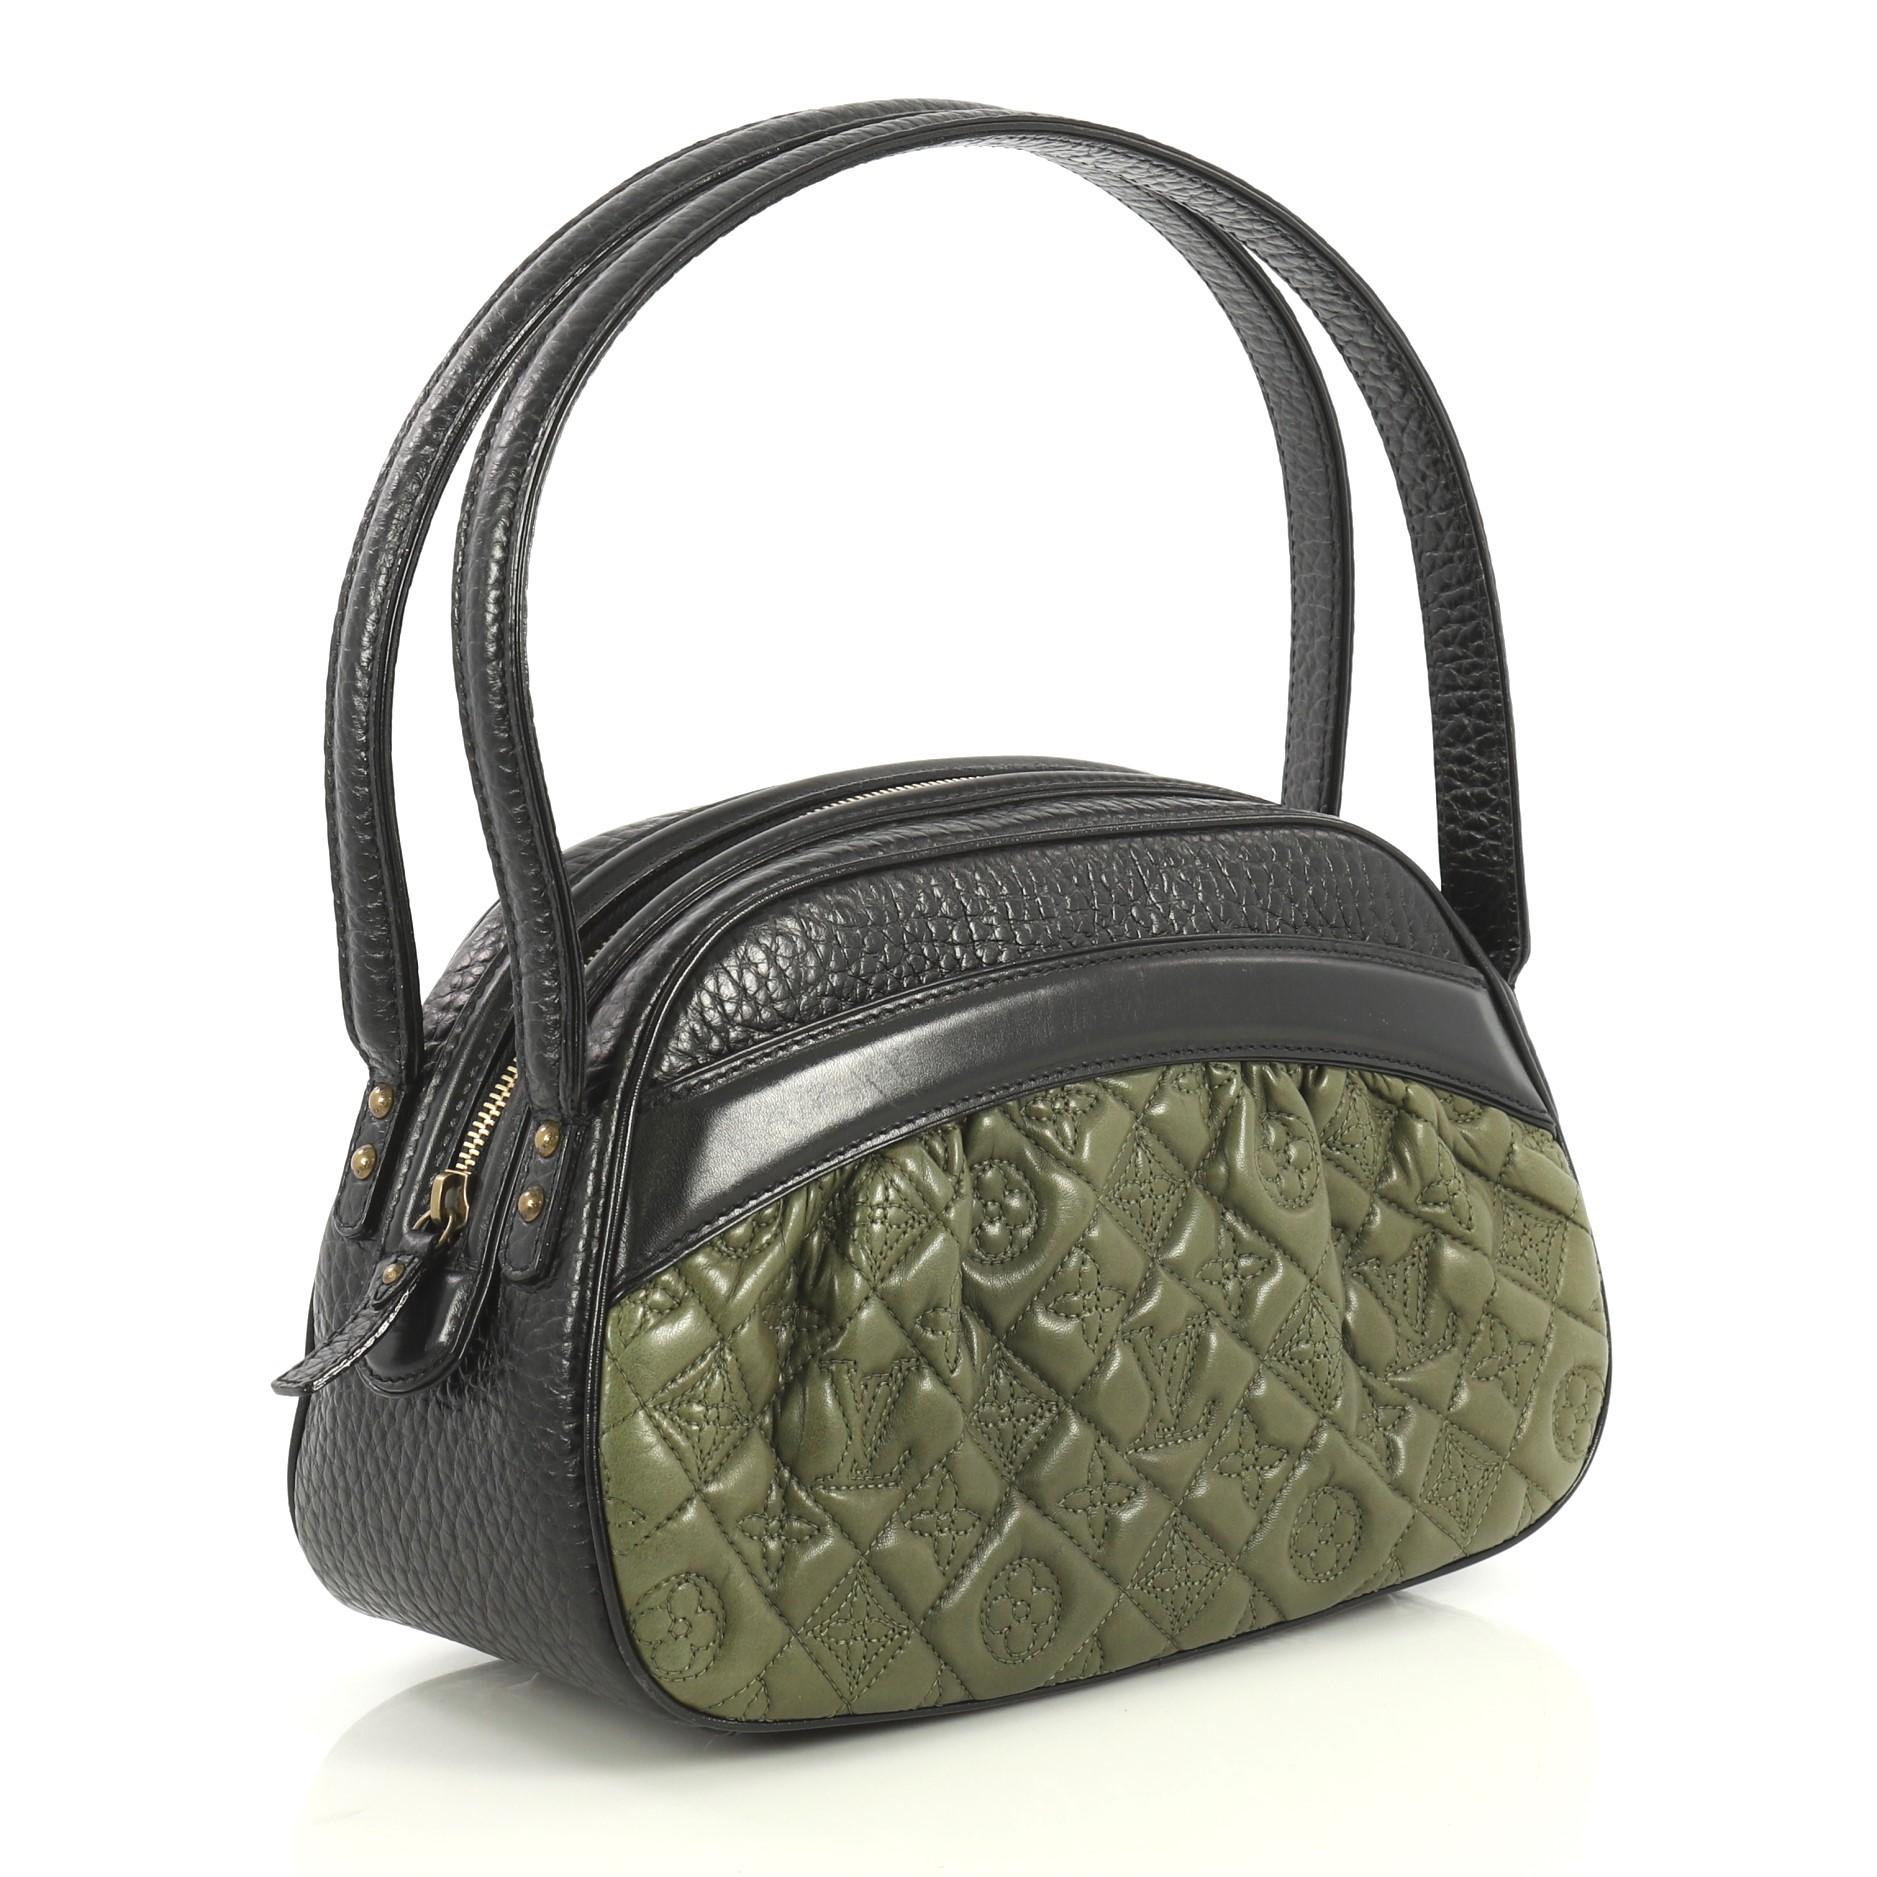 This Louis Vuitton Klara Vienna Handbag Monogram Quilted Lambskin, crafted from black and green lambskin leather, features dual flat leather handles, monogram quilted embroidery, exterior slip pocket, protective base studs and aged gold-tone